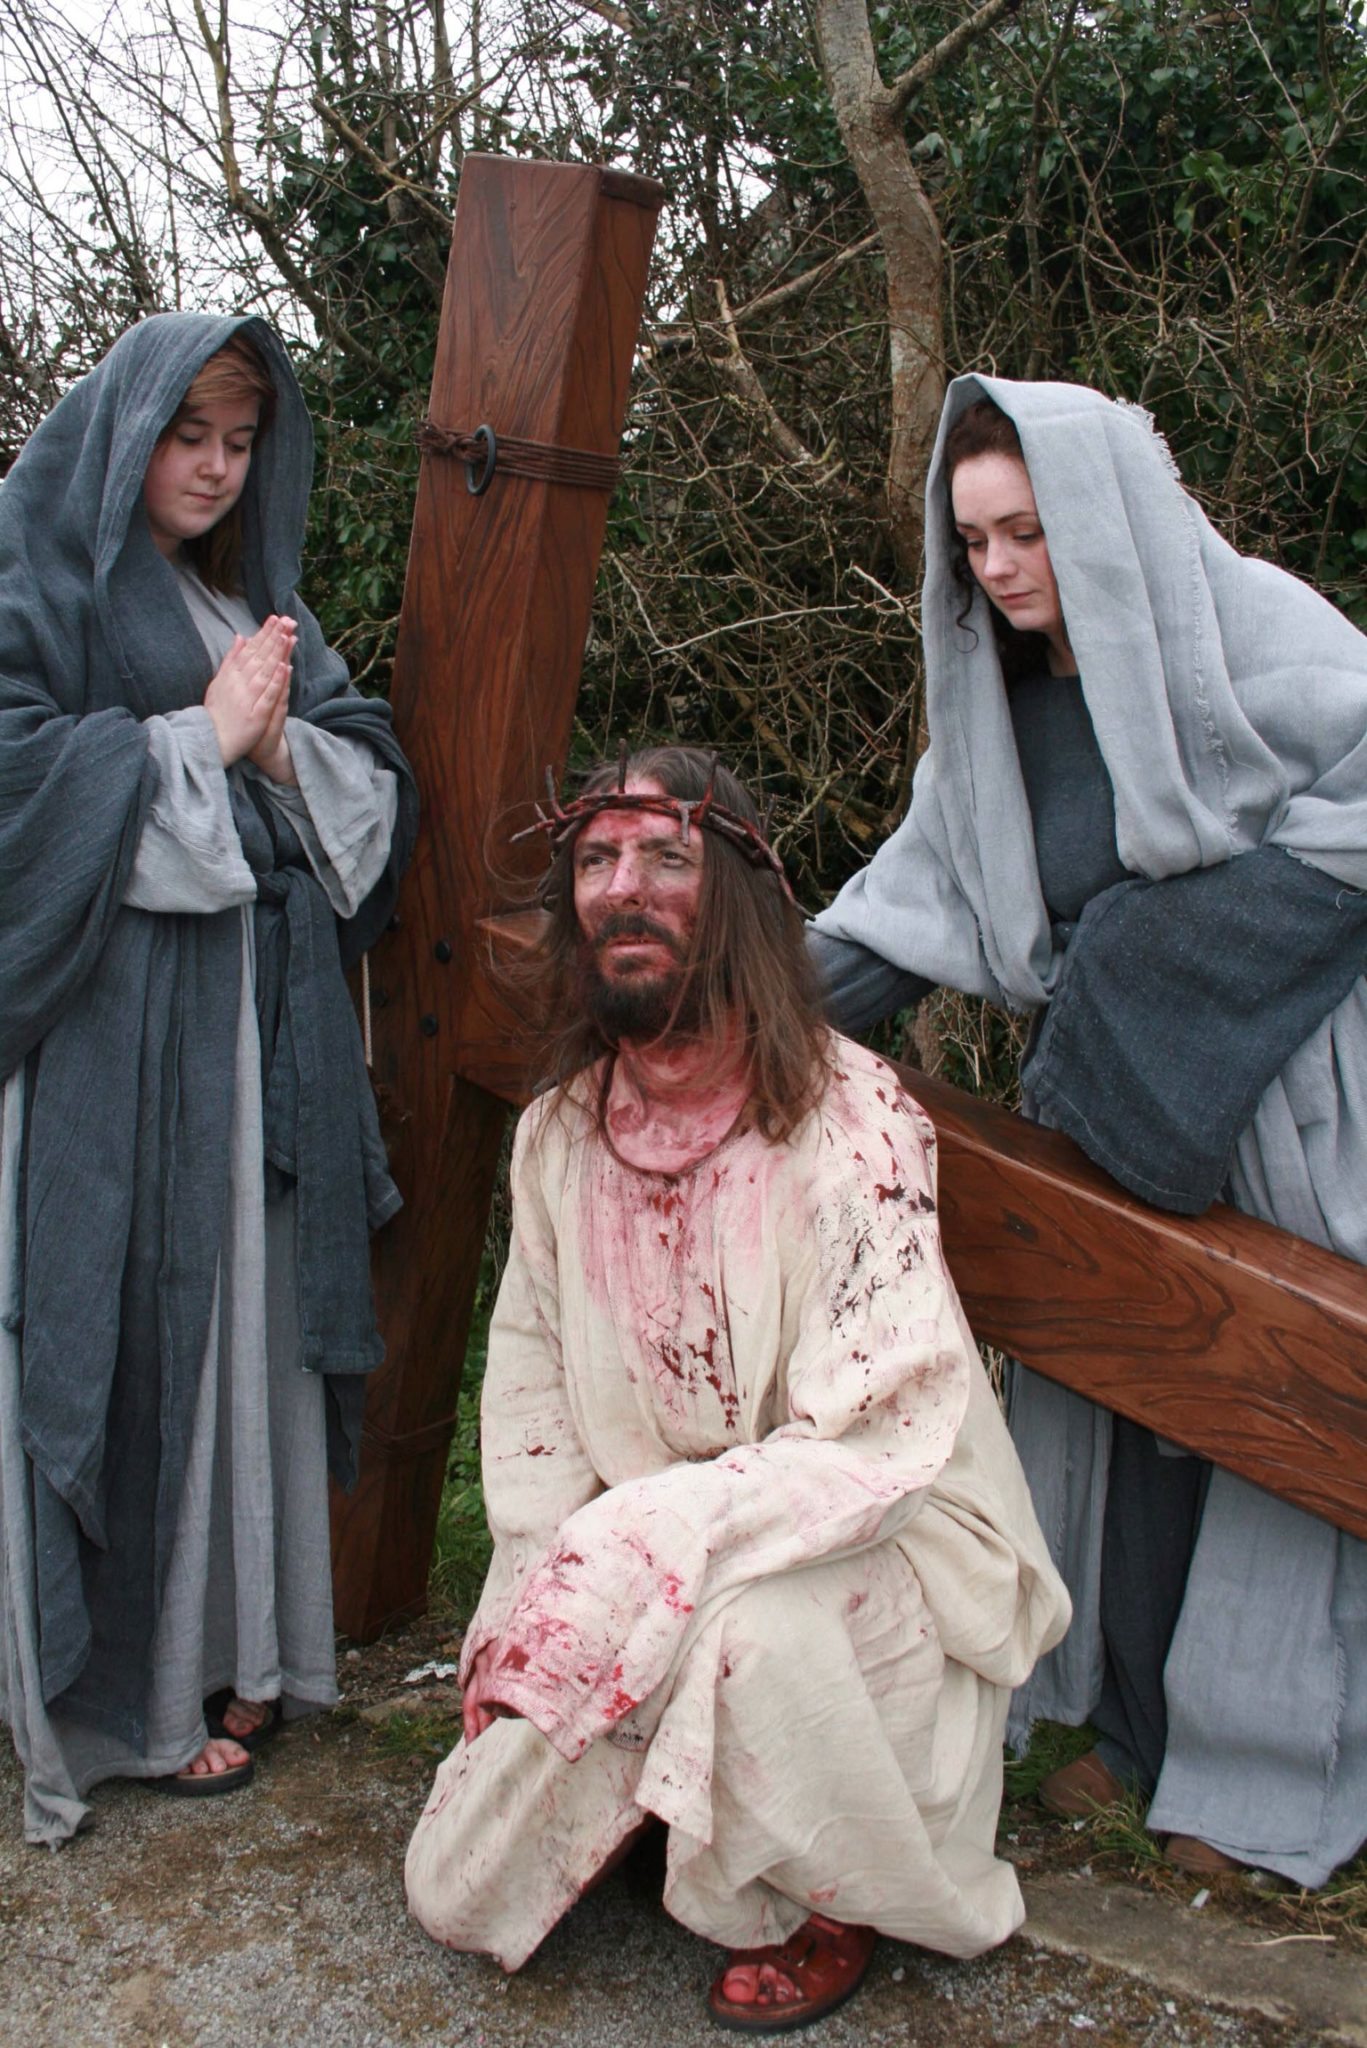 Mr Sean Shields and a team of 50 strong actors and backroom staff perform The Way of the Cross, with the Legion Ireland, the Roman Re-Enactment Society, Brian Smith as Jesus Christ